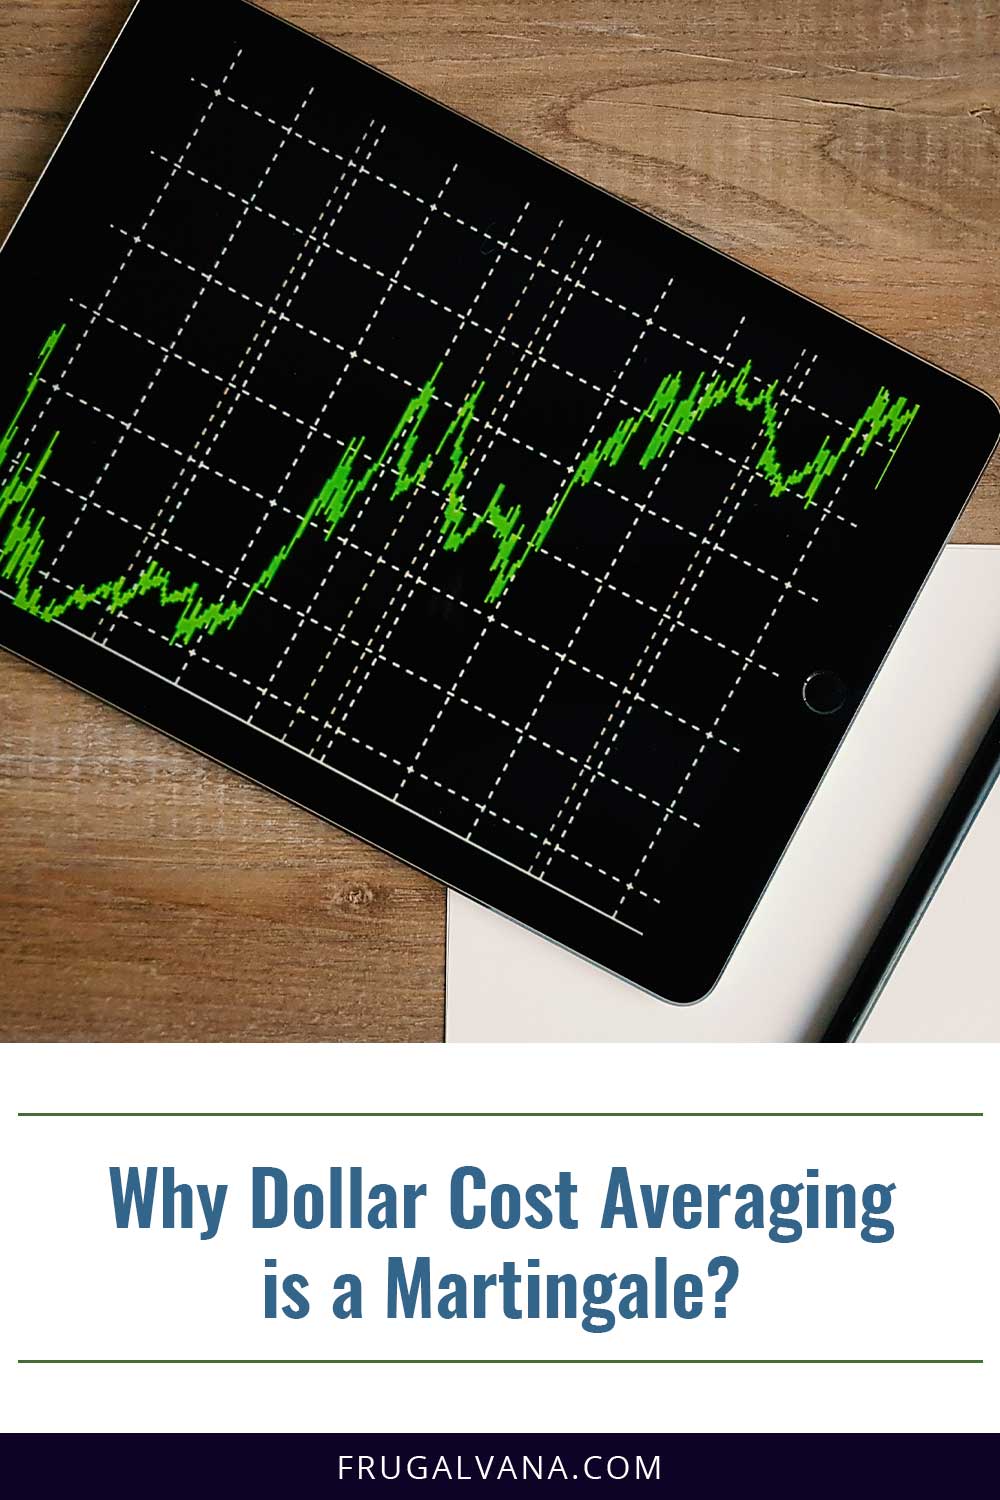 Why Dollar Cost Averaging is a Martingale?